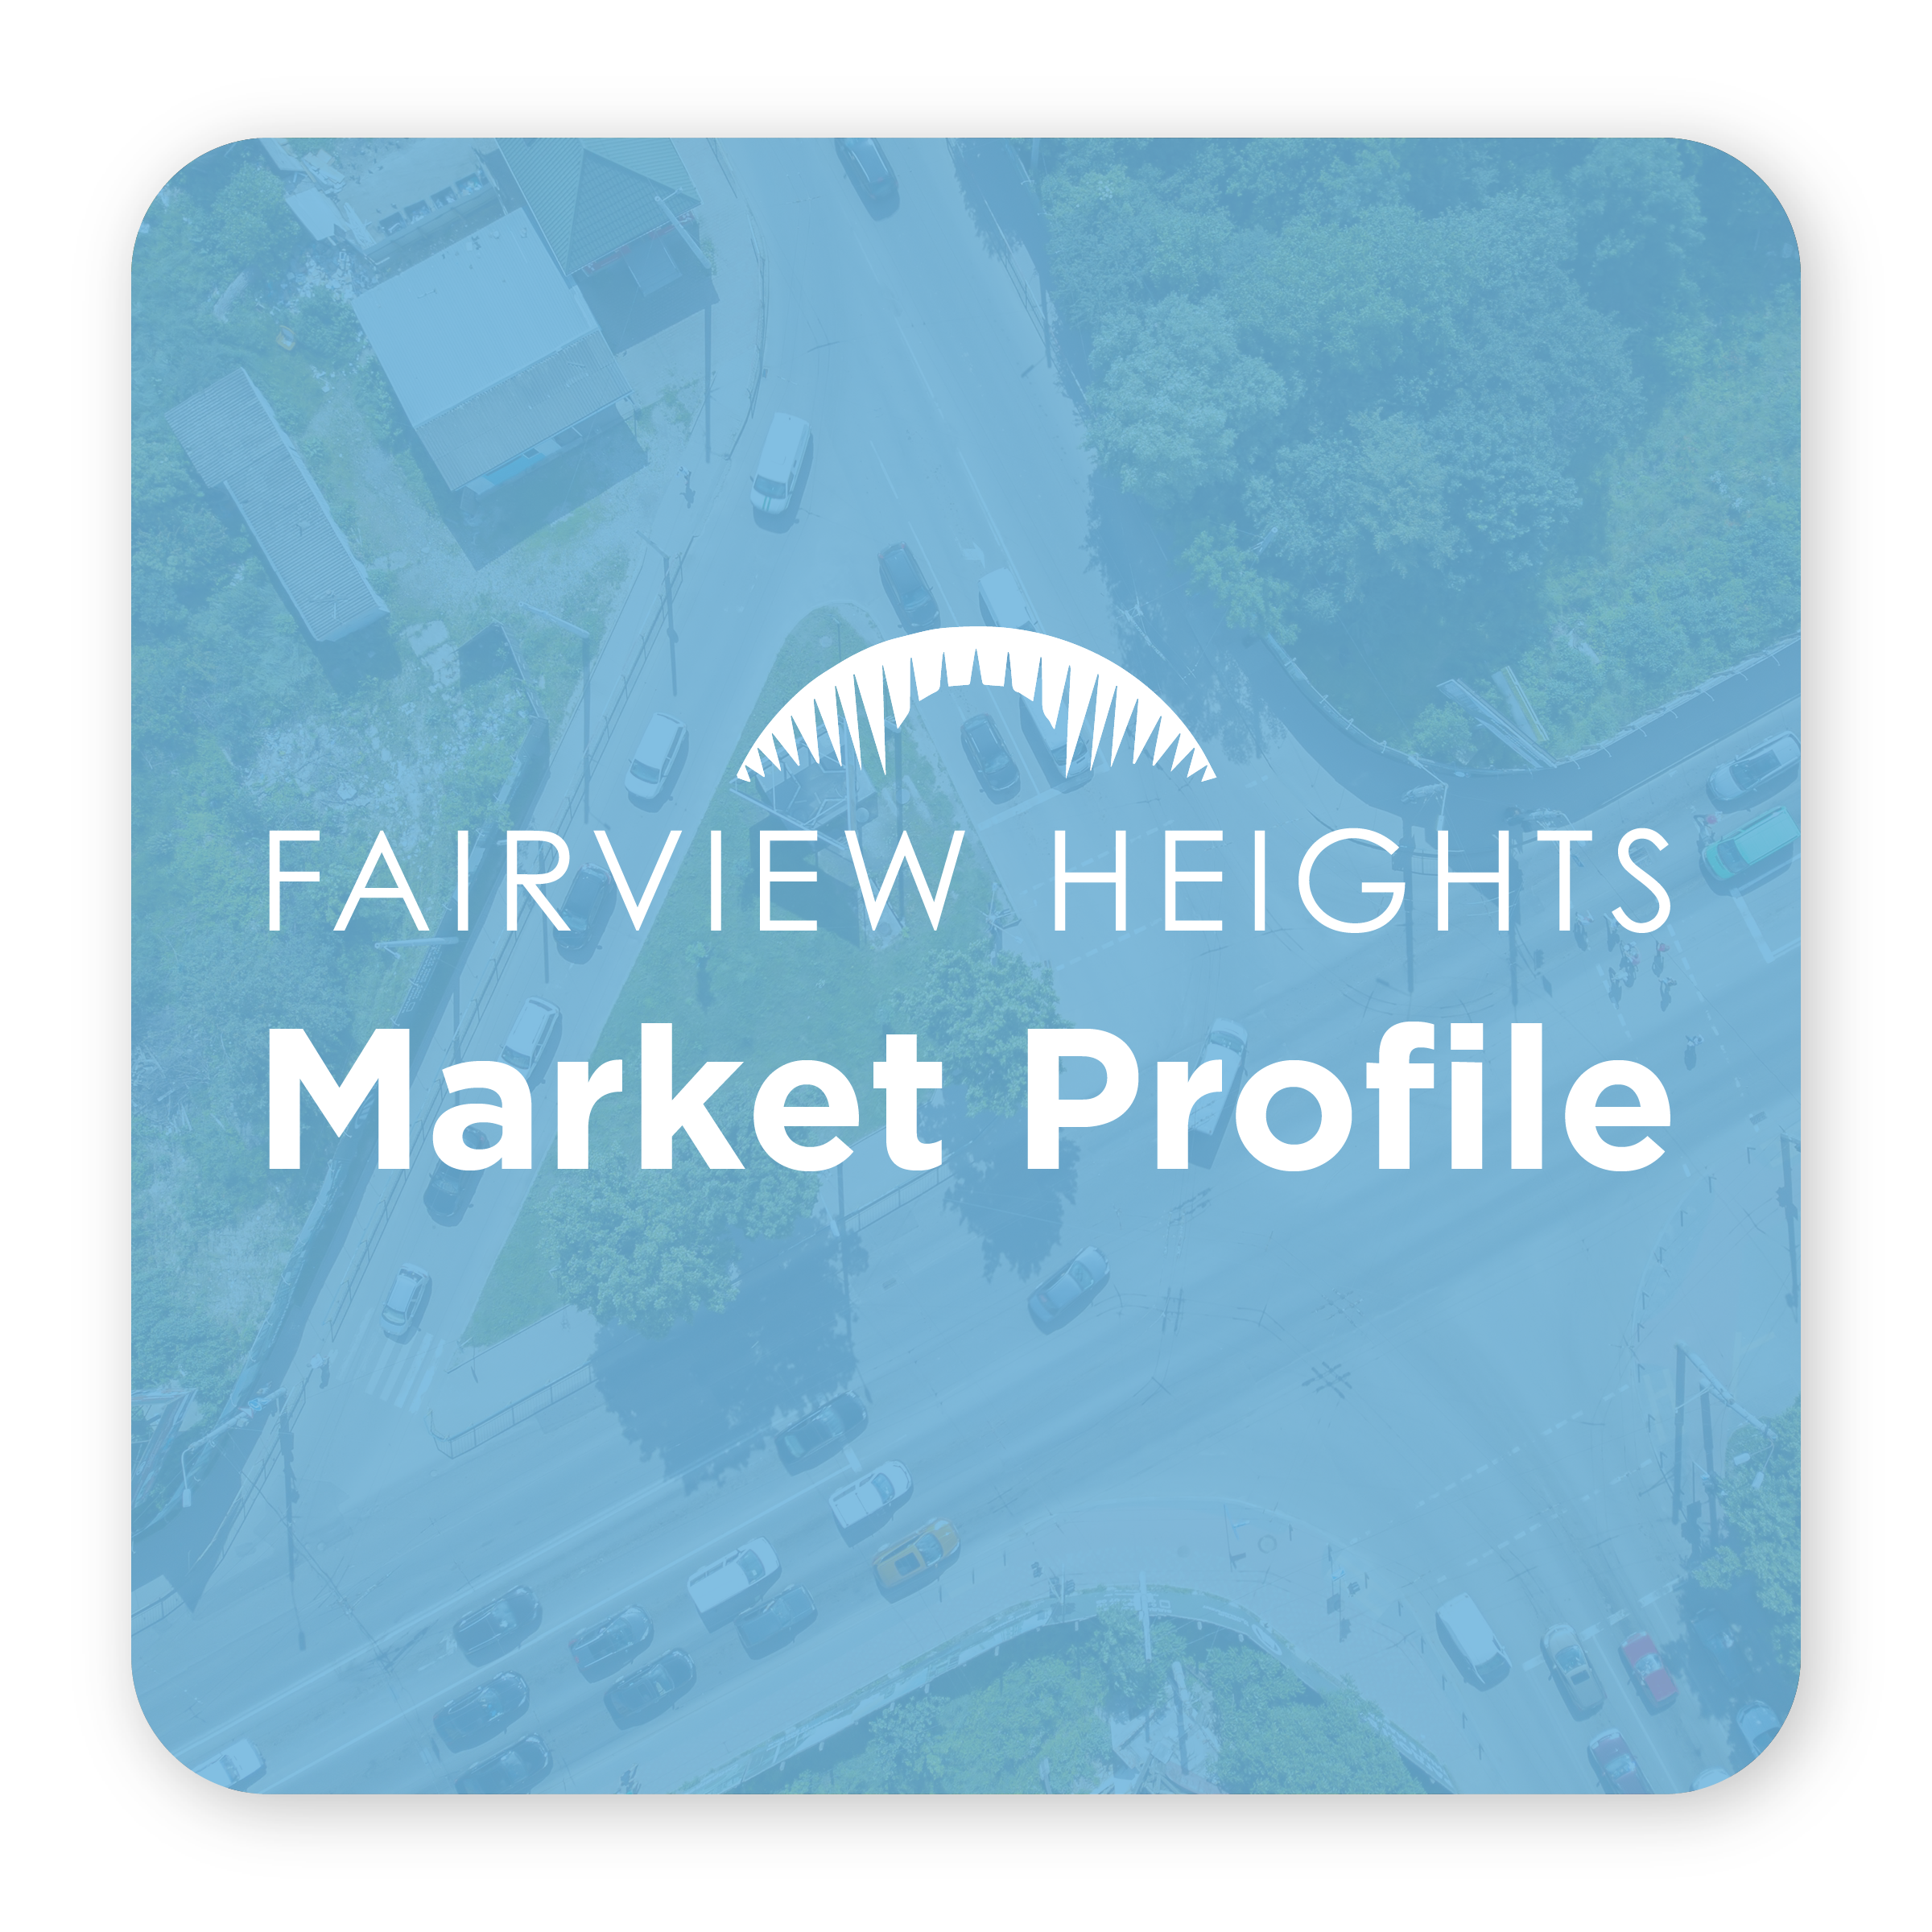 Fairview Heights Market Profile